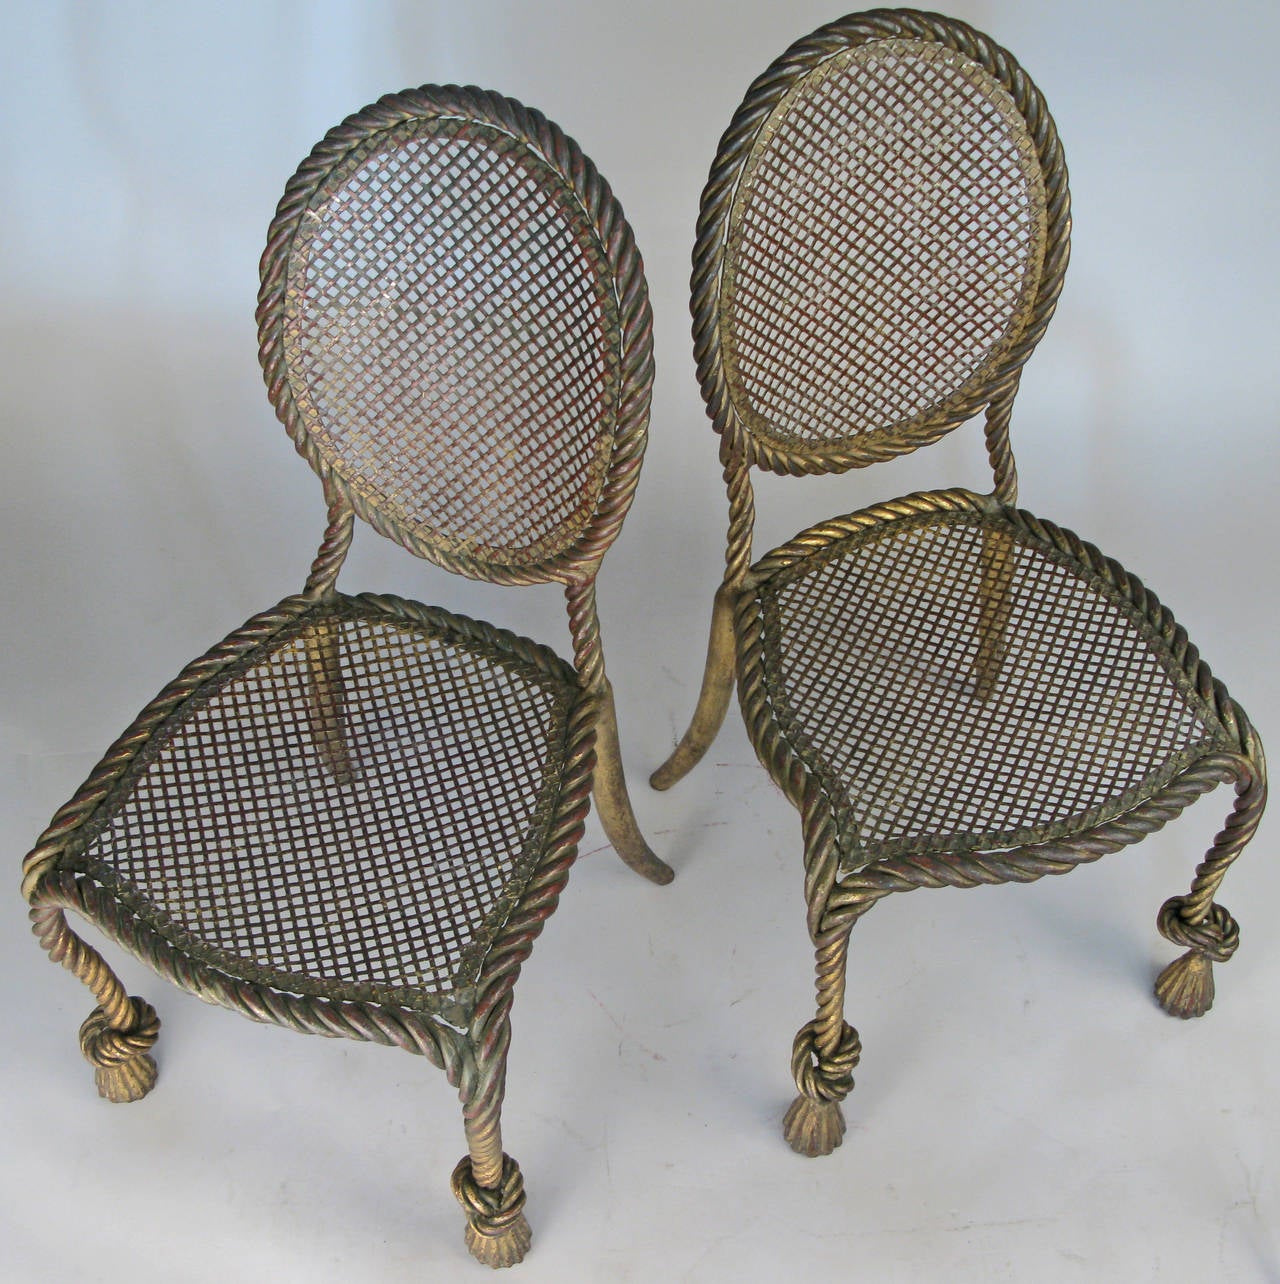 A pair of very well-made and elegant Classic 1950s Italian chairs with heavy frames made in the form of twisted rope with tassel front feet. Finished in their original Italian gilt gold over red. Finish has worn into a beautiful dark patina. Truly